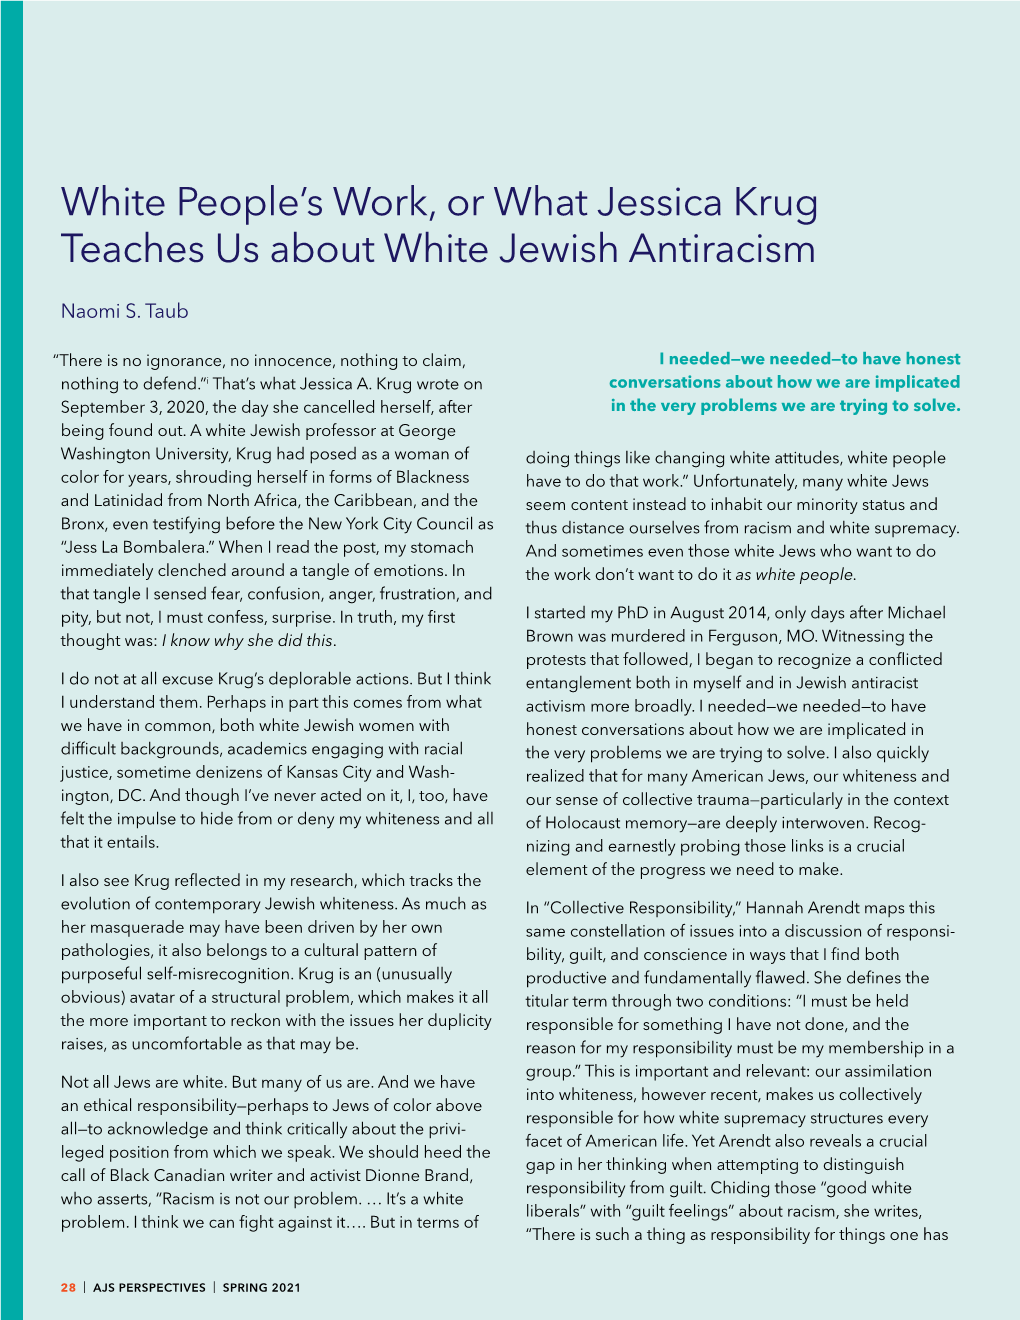 White People's Work, Or What Jessica Krug Teaches Us About White Jewish Antiracism